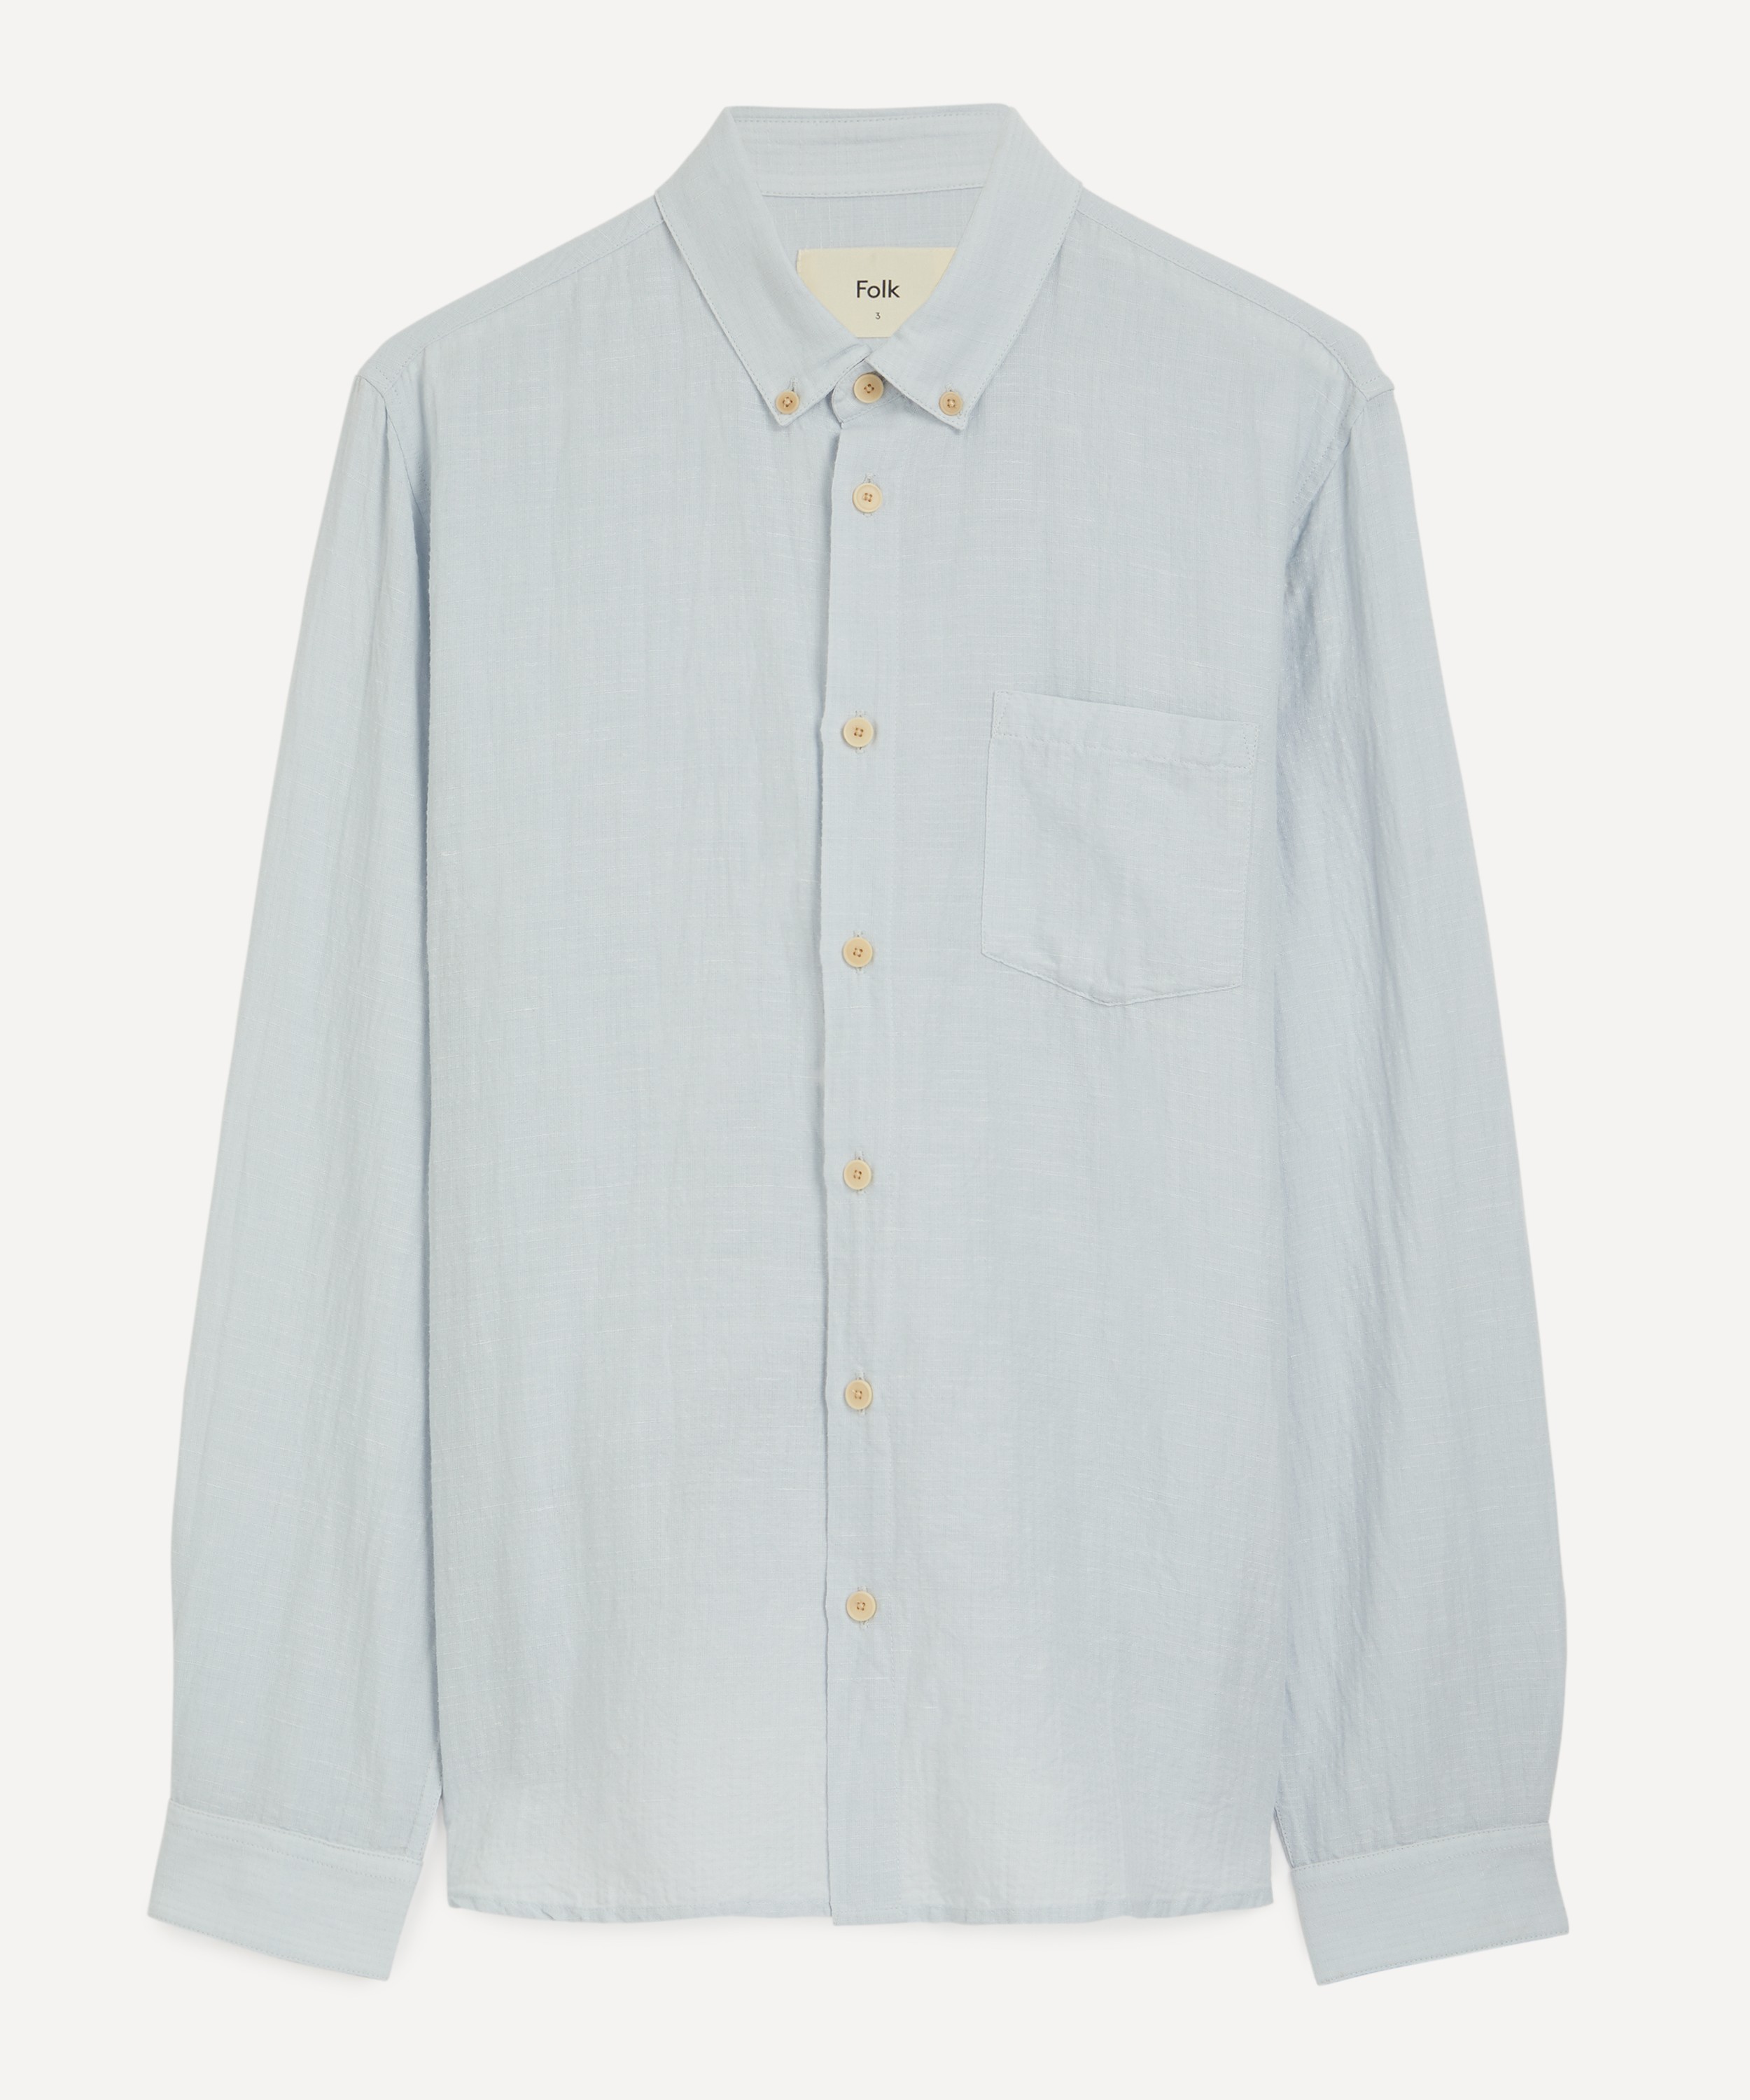 Folk - Relaxed Fit Shirt image number null